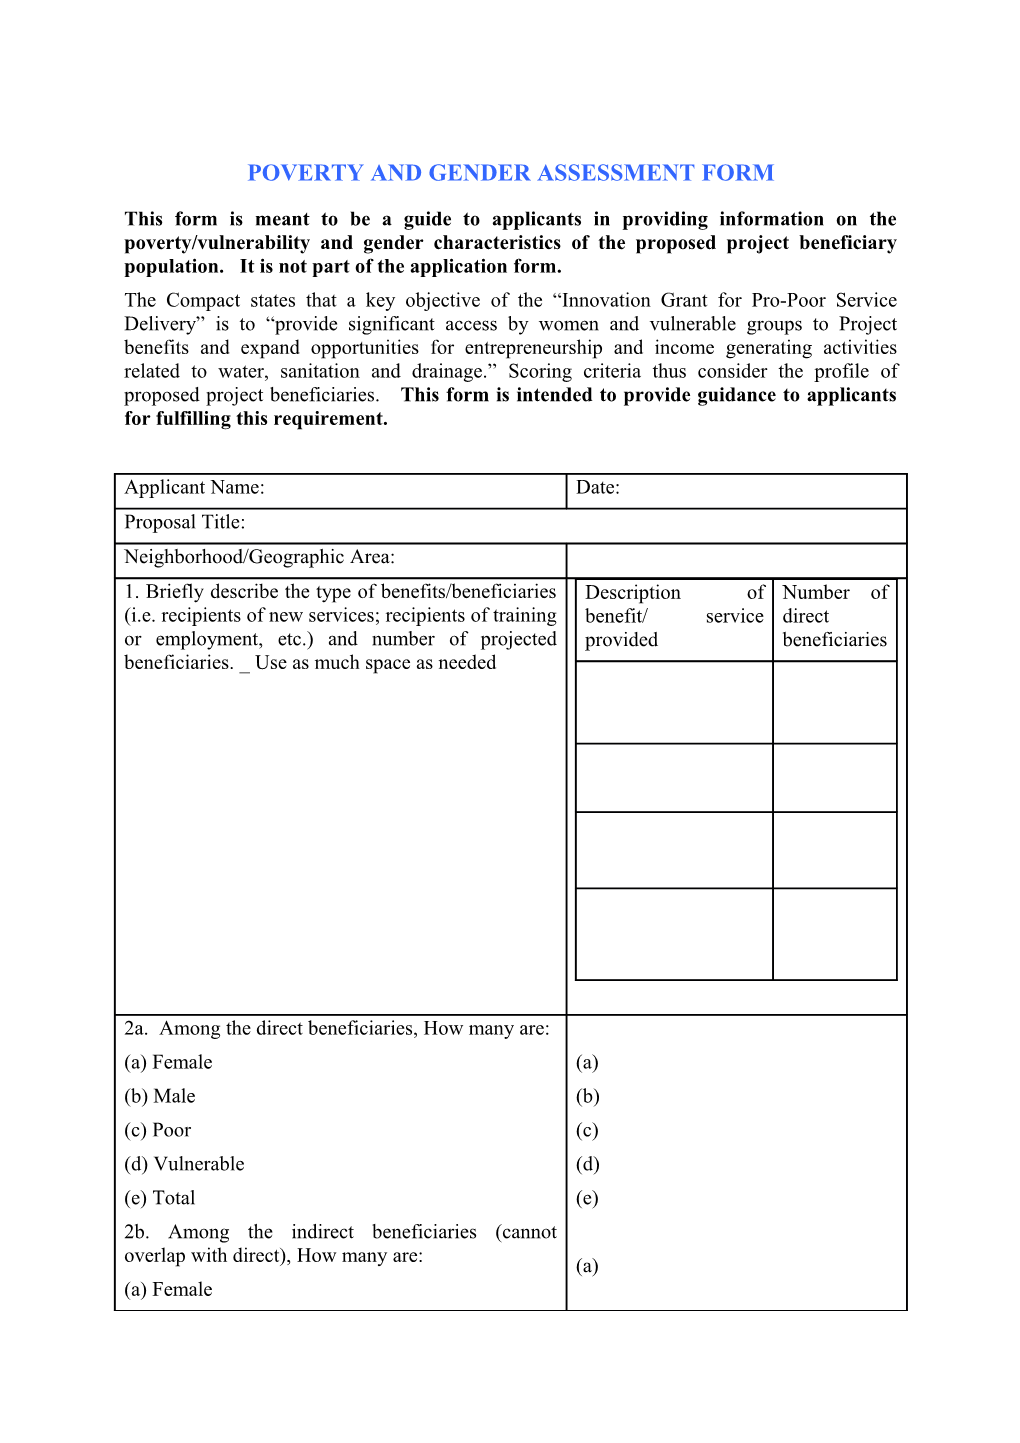 Poverty and Gender Assessment Form